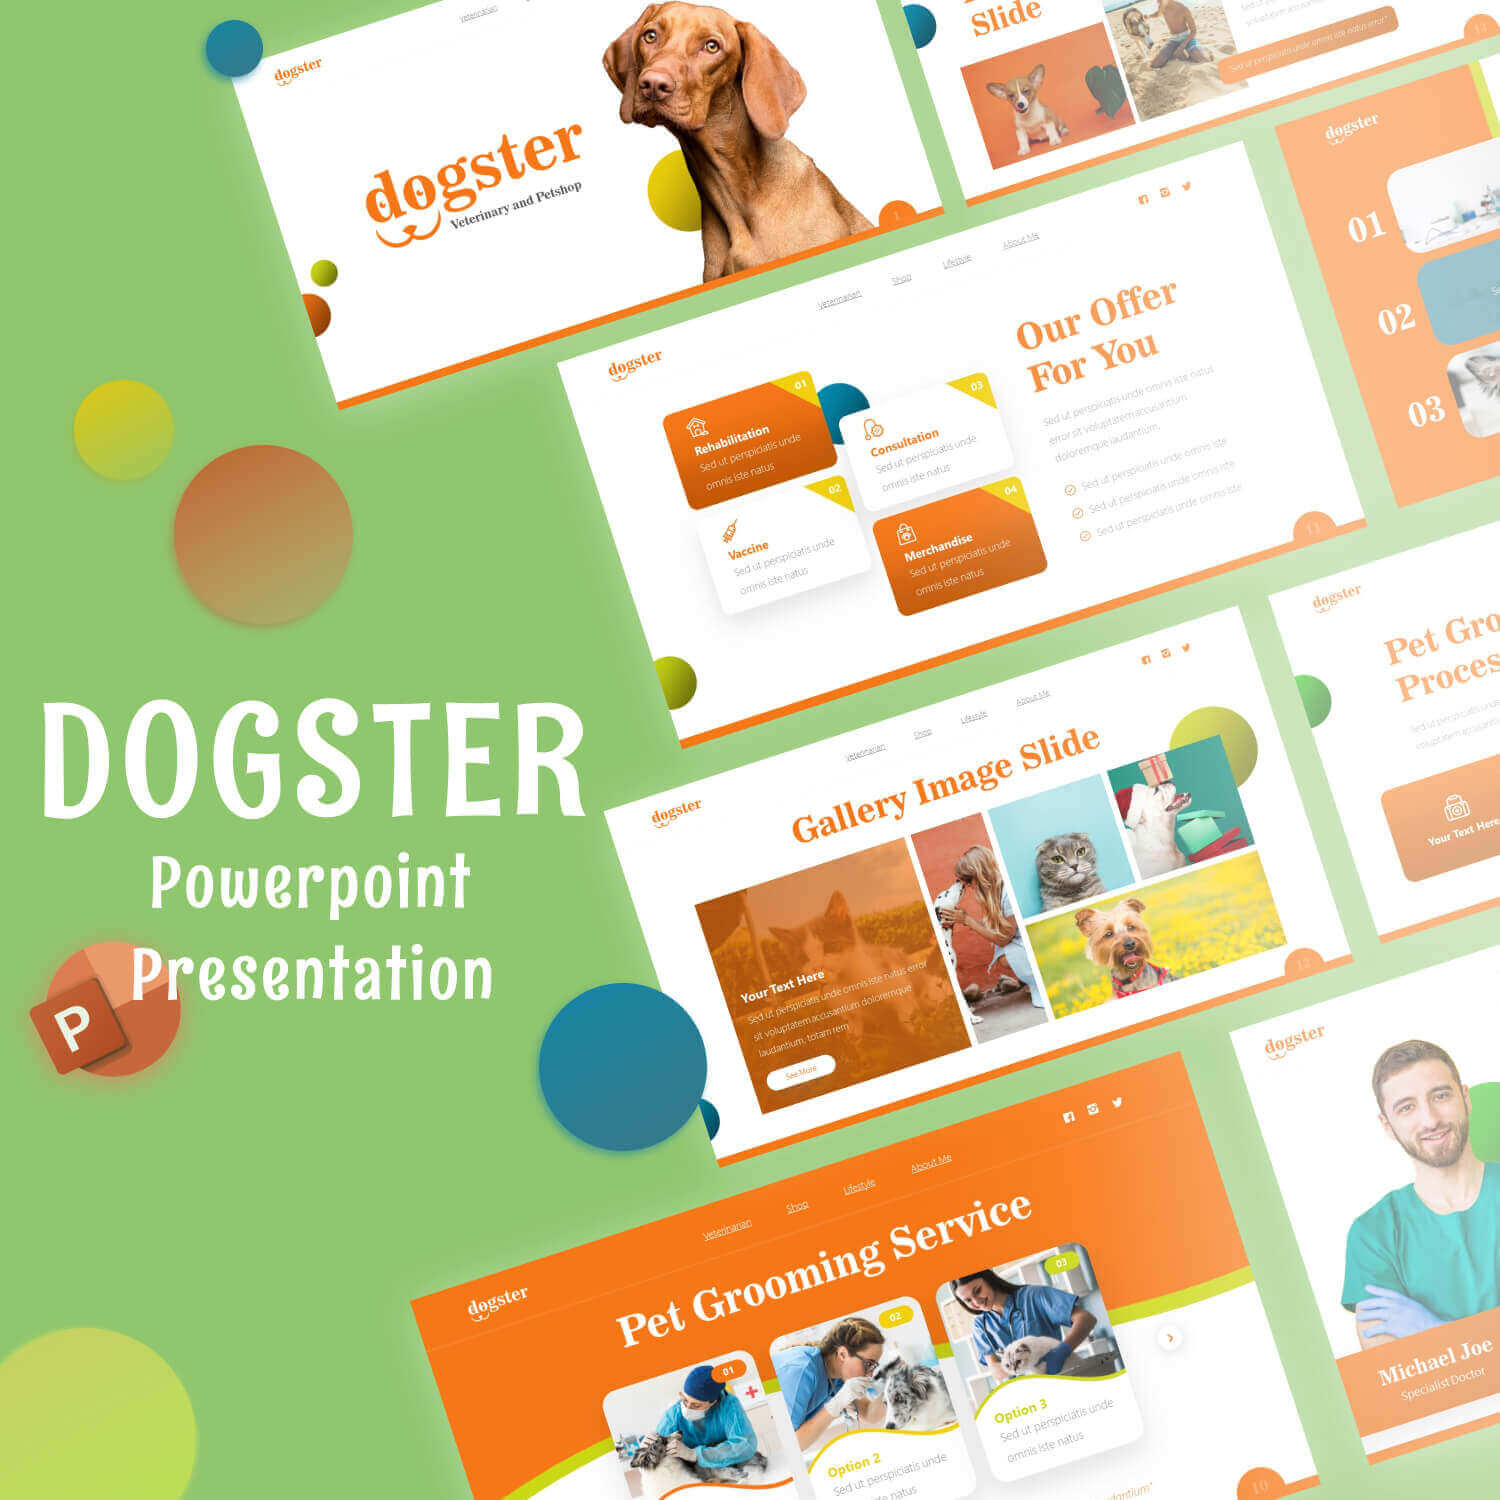 Dogster Powerpoint Presentation.